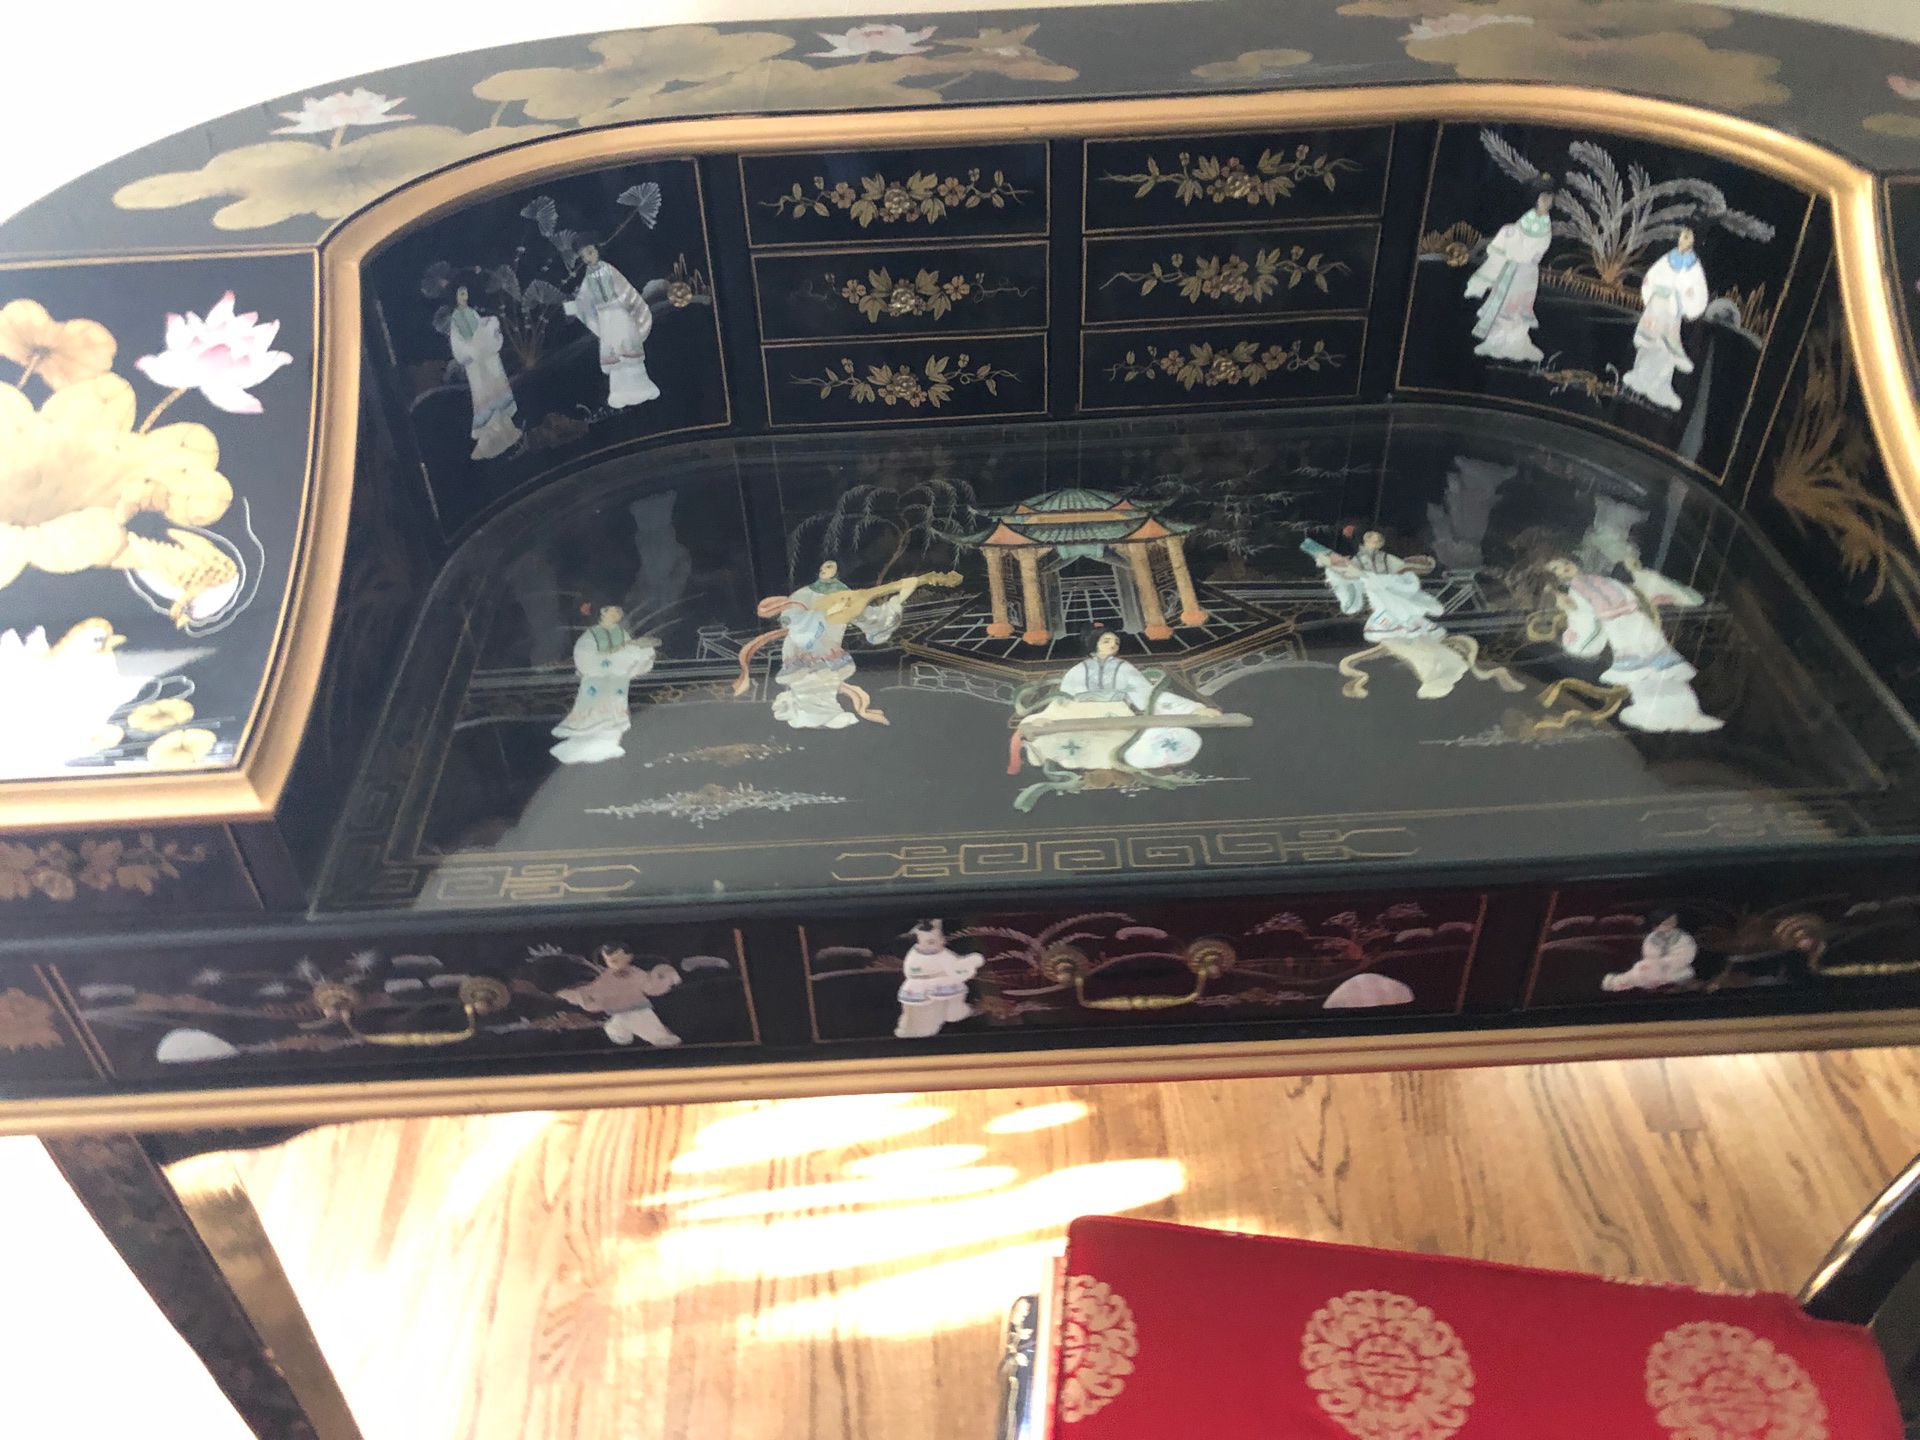 Beautiful antique lacquer Chinese desk amazing detail terrific mother of pearl inlay and what looks like Jade I can’t be safe search can’t be certain